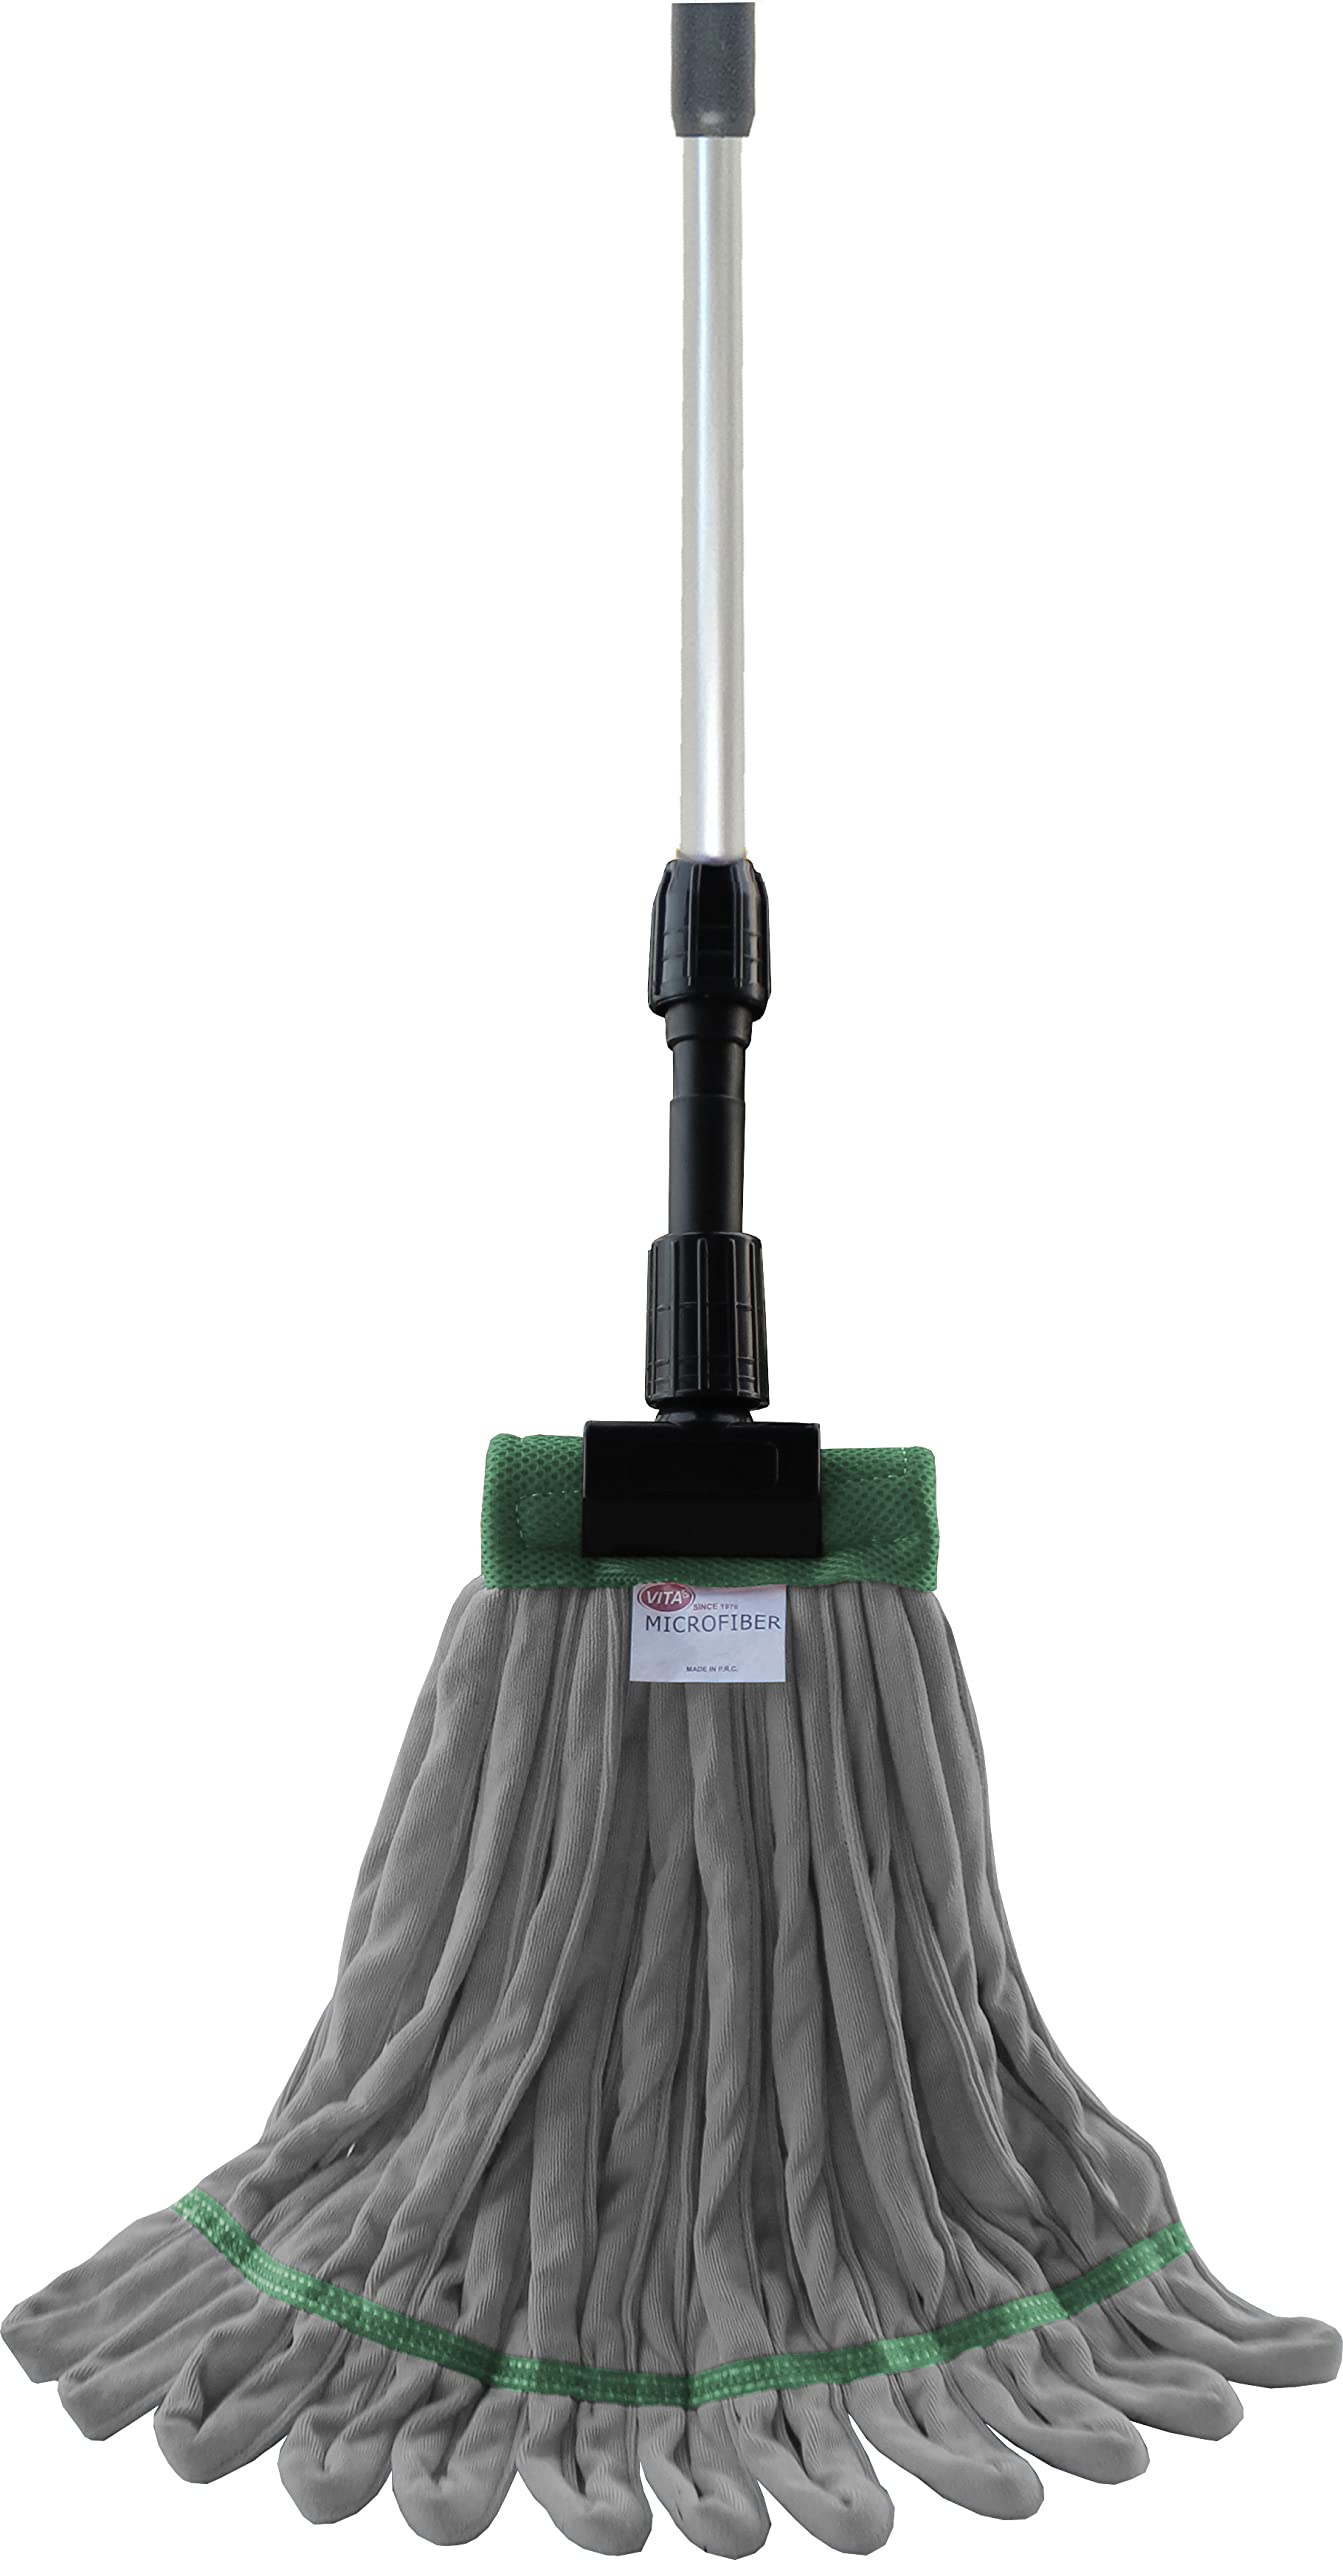 Gray Microfiber Pro Wet Mop Kit: Unrivaled Performance and Durability